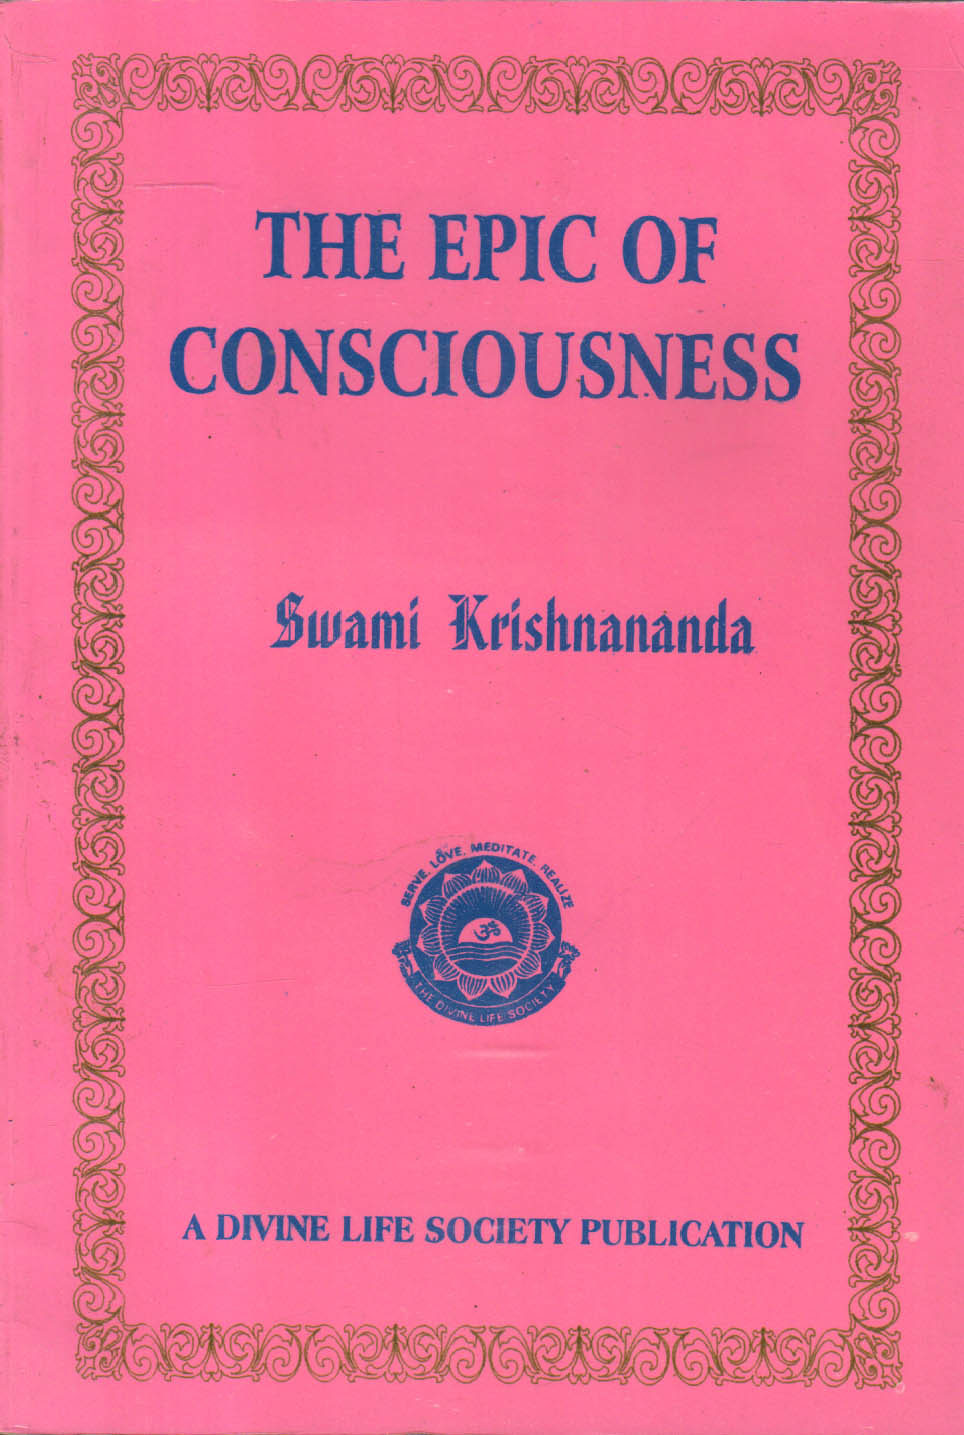 The Epic of Consciousness